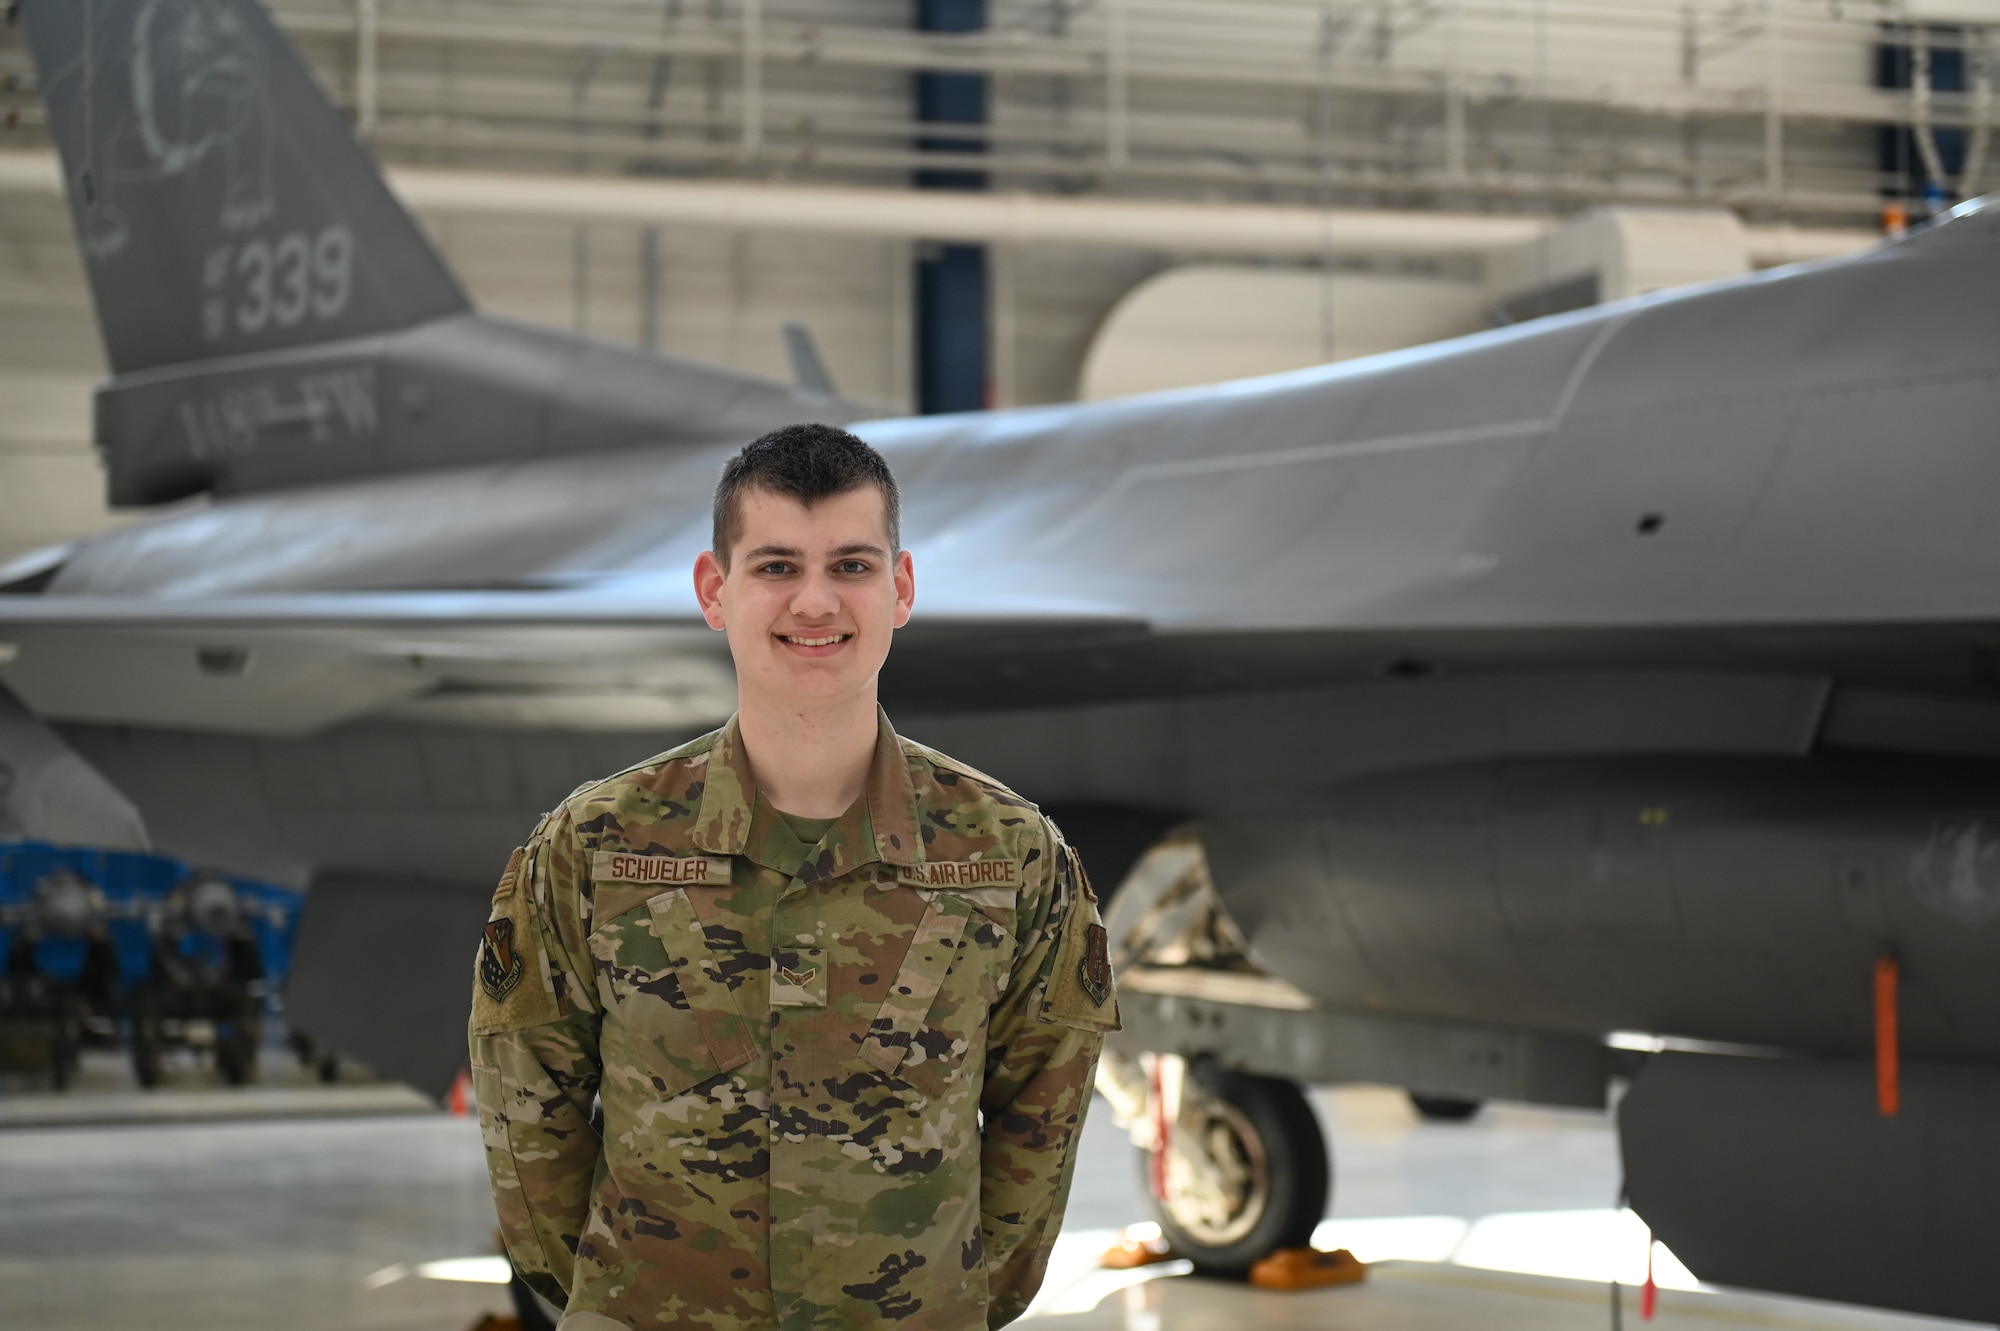 U.S. Air National Guard tactical aircraft maintenance specialist, Airman 1st Class Ayden Schueler, poses for a photo in front of an F-16 Fighting Falcon assigned to the 148th Fighter Wing, Minnesota Air National Guard, on February 24, 2023. Schueler is one of seven airmen assigned to the 148th Fighter Wing who earned the highest possible ASVAB AFQT score of 99.